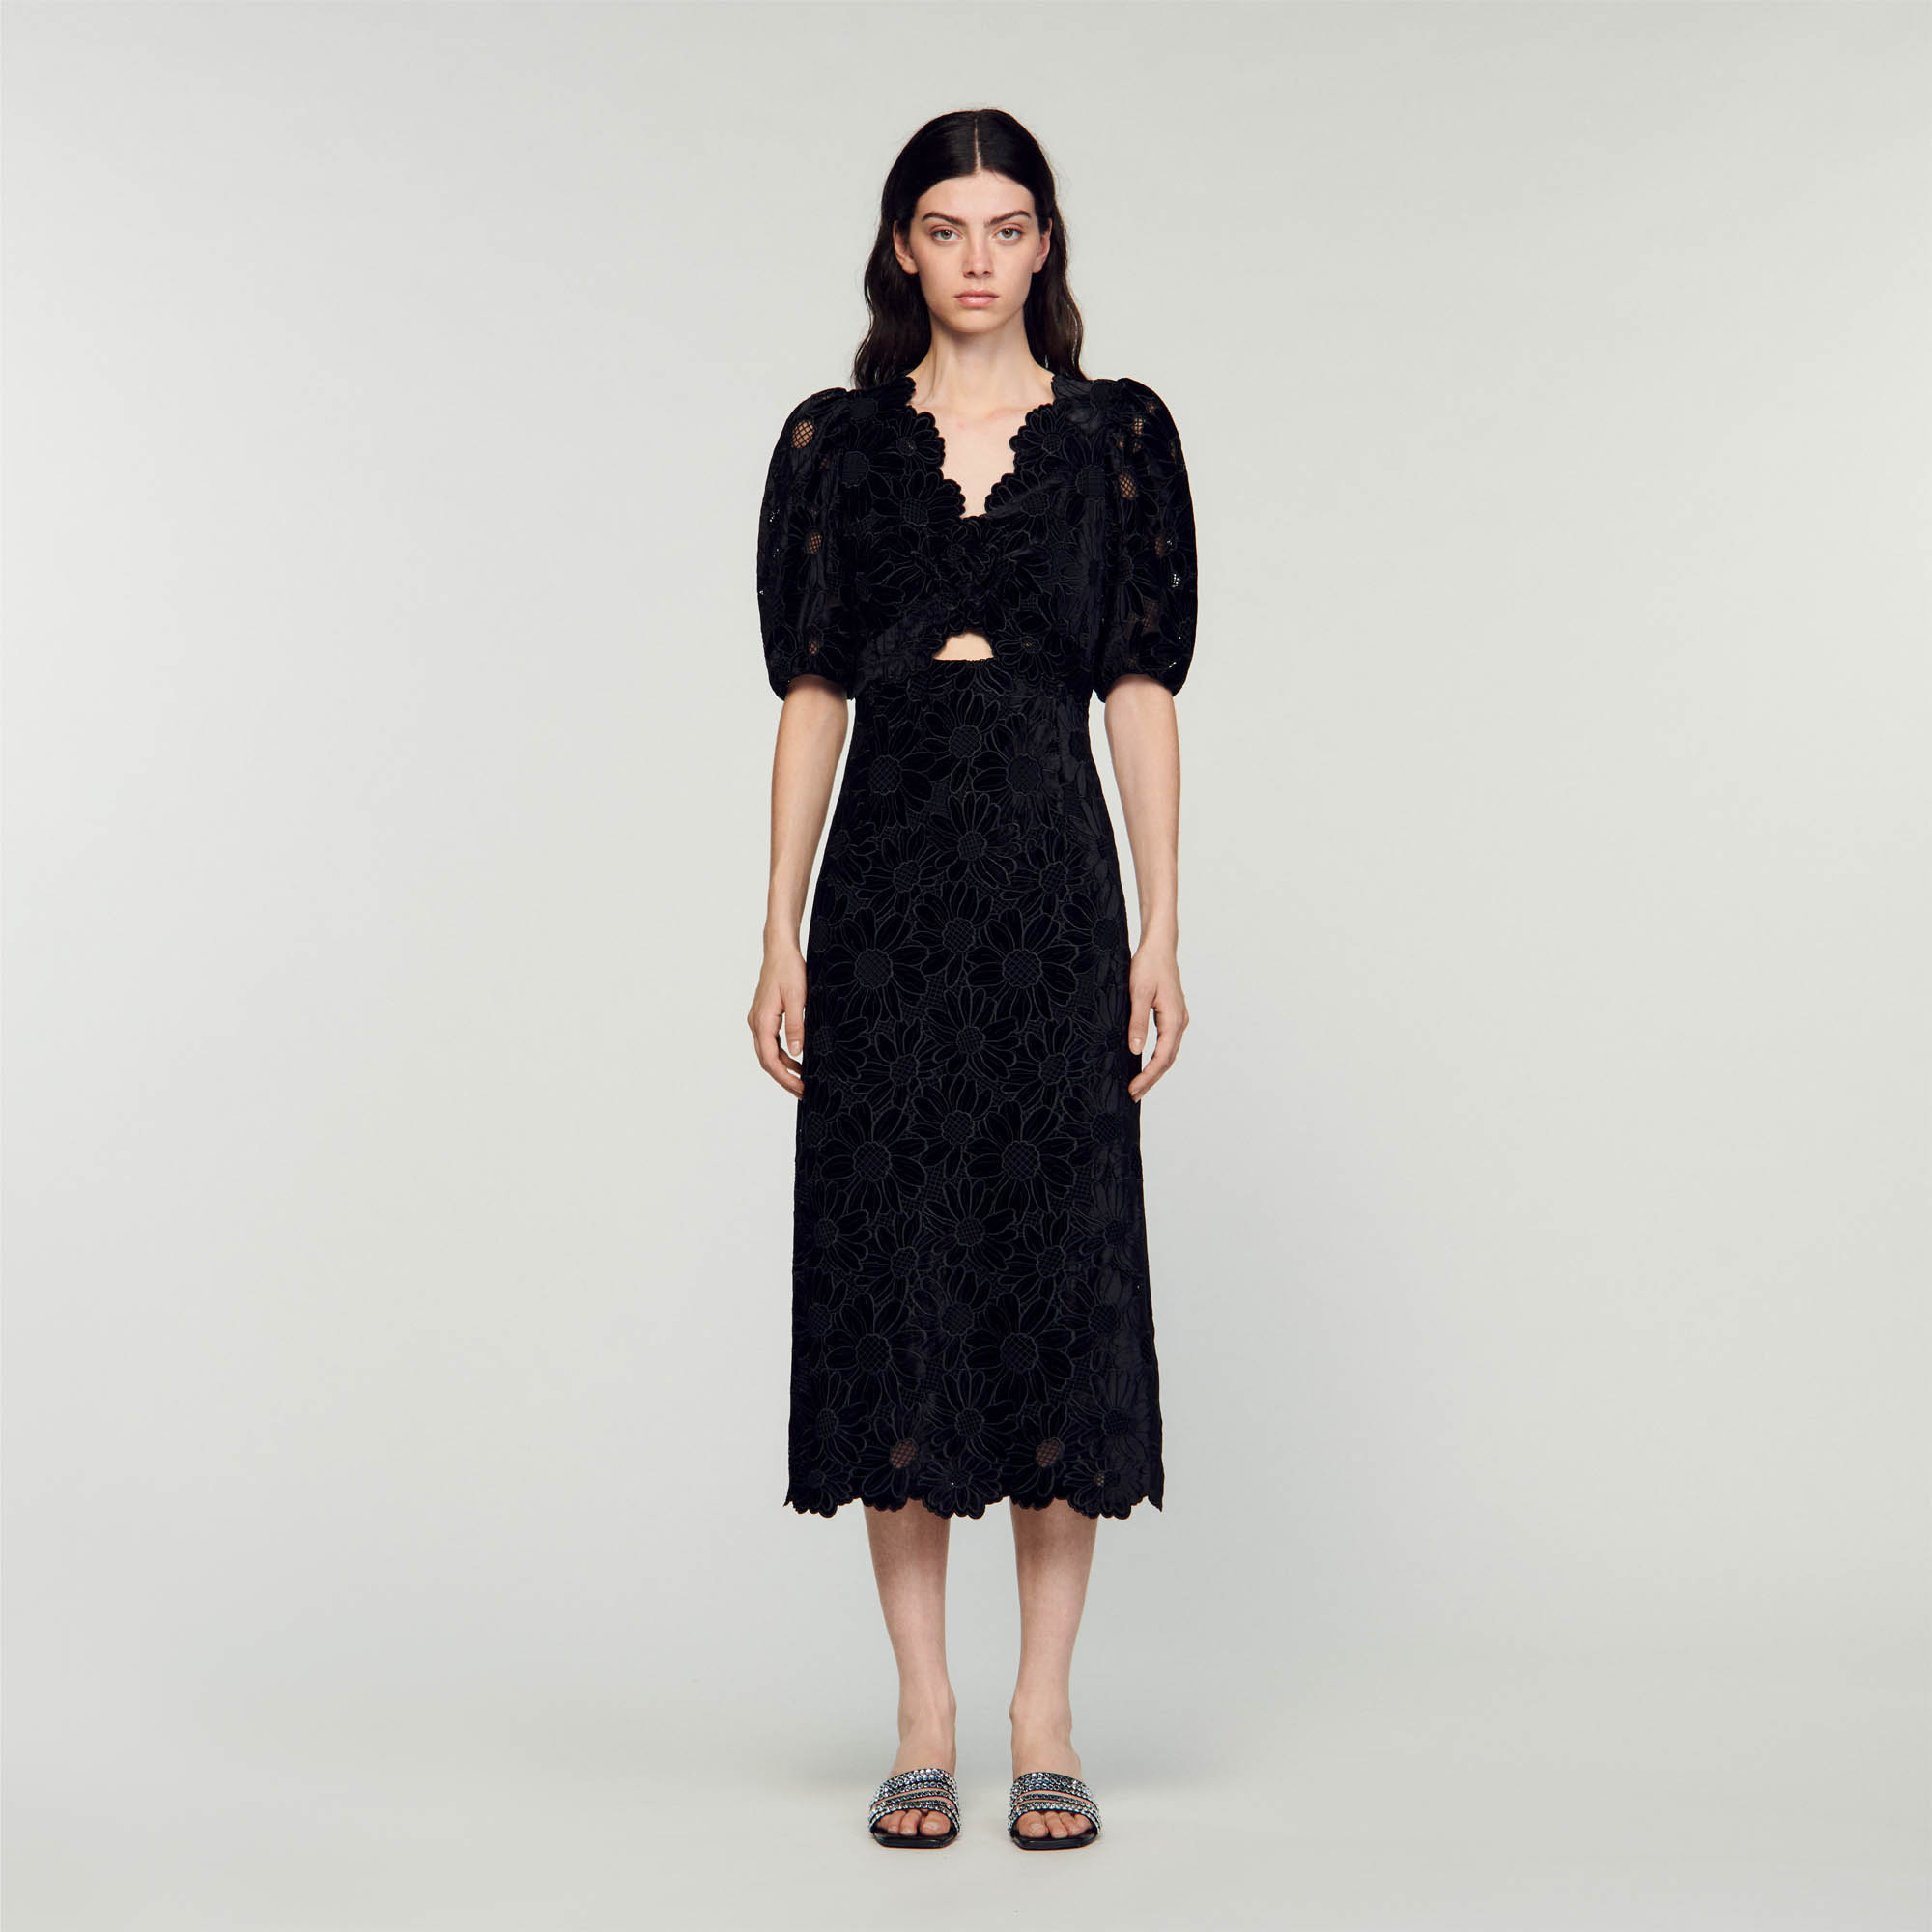 Sandro polyester Daisy-patterned maxi dress in guipure and velvet, featuring a scalloped V-neckline, waist with twist details and voluminous short sleeves